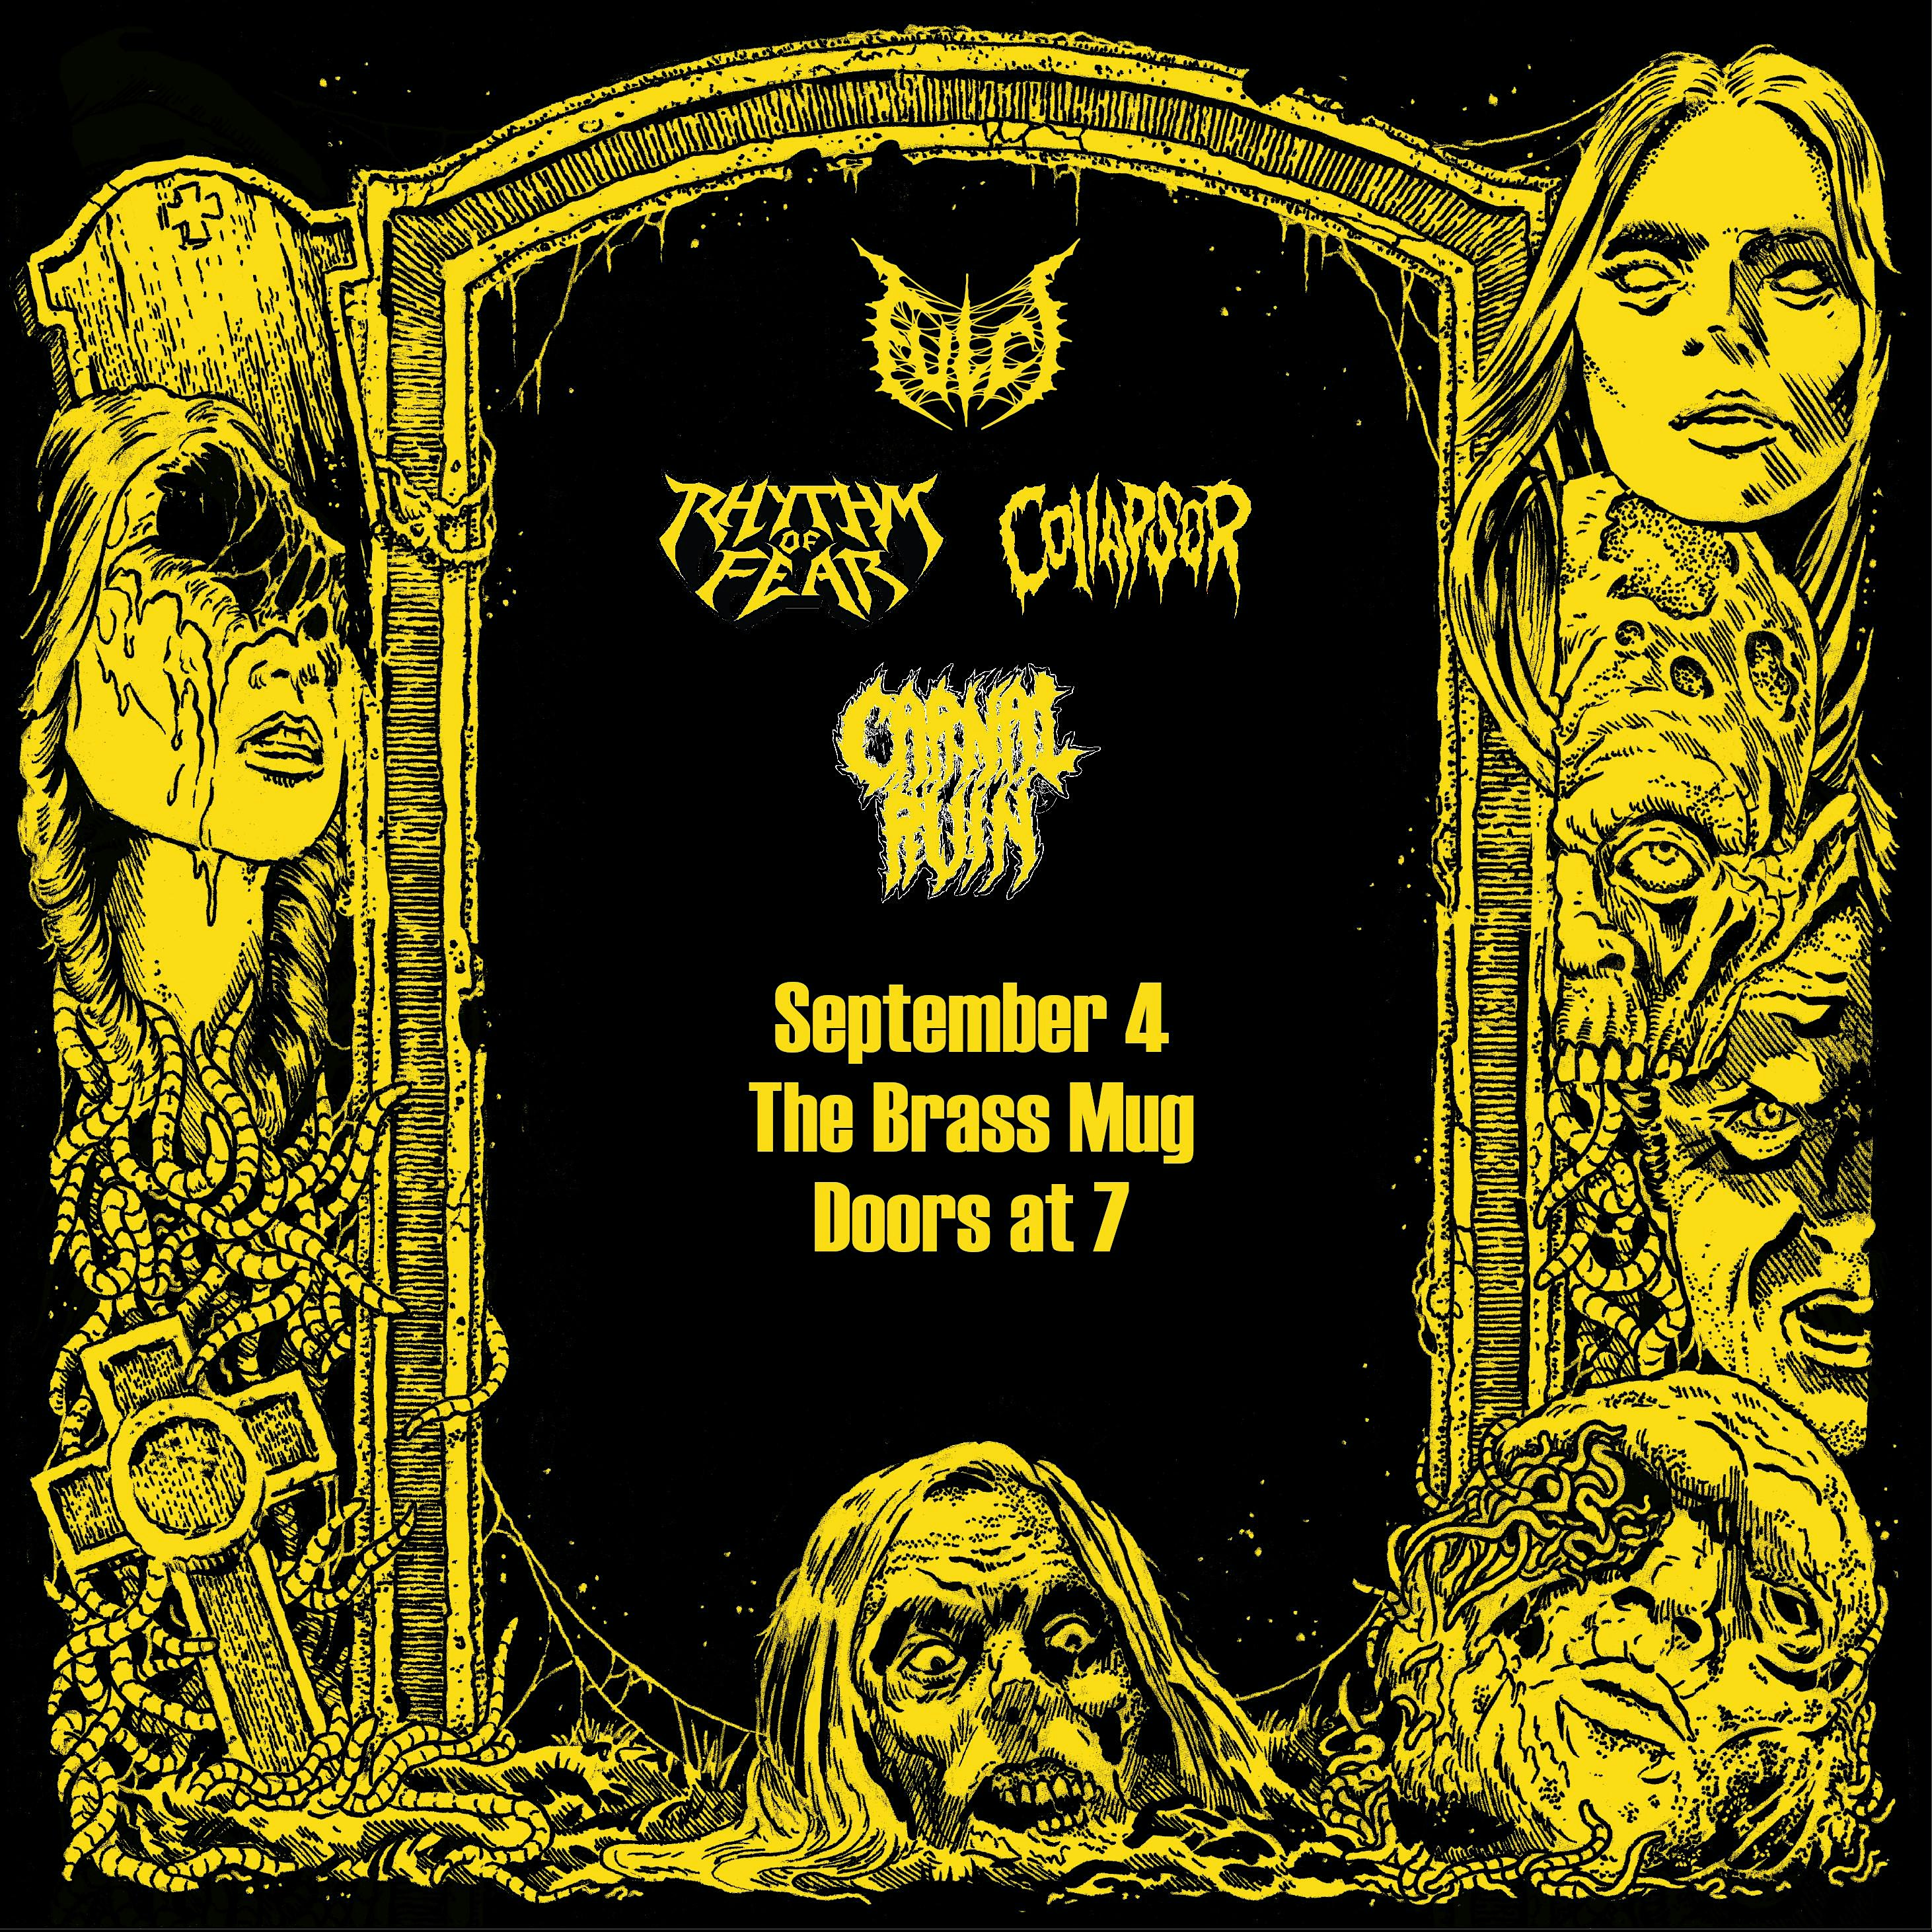 Fulci, Rhythm of Fear, Collapsor, and Carnal Ruin in Tampa at the Brass Mug